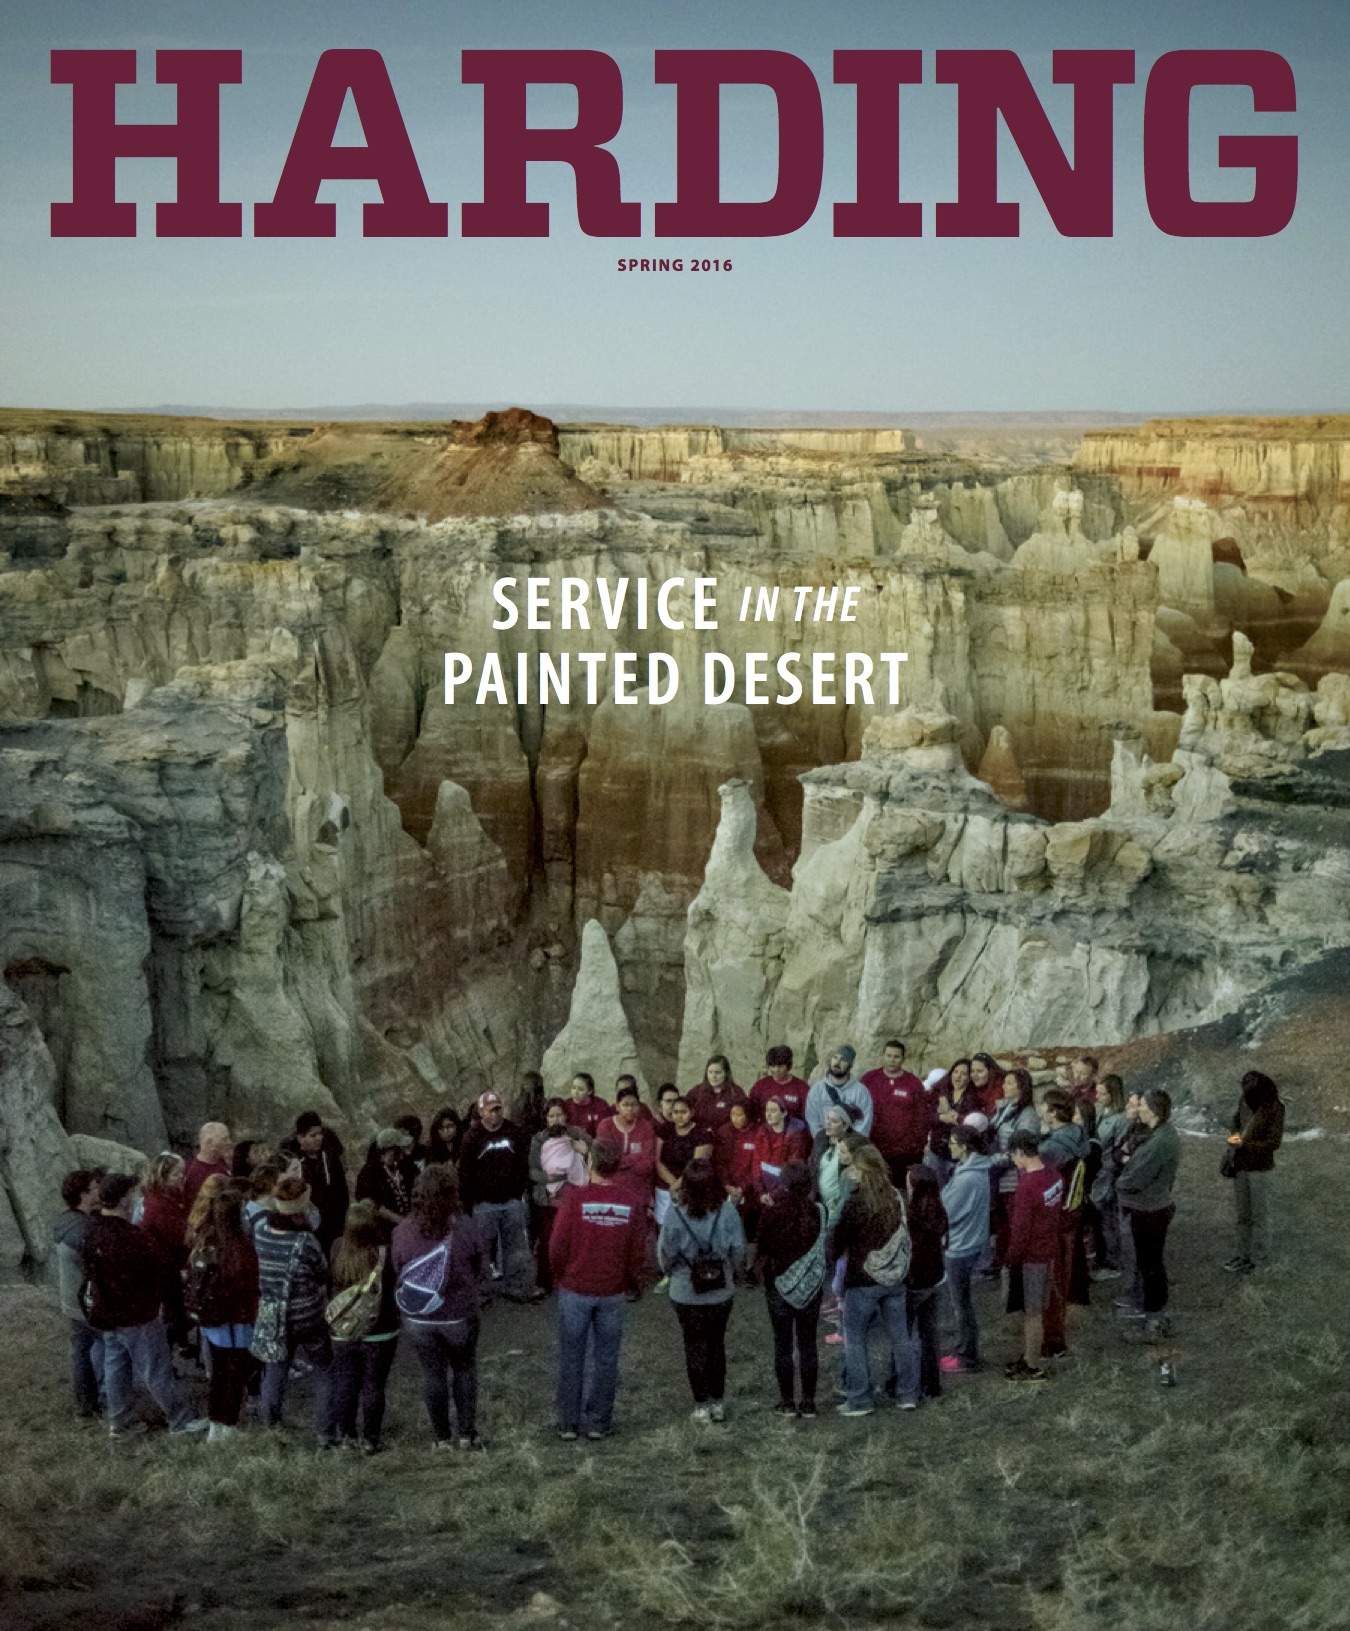 harding-spring-mag-16-for-review-dragged-1.jpg